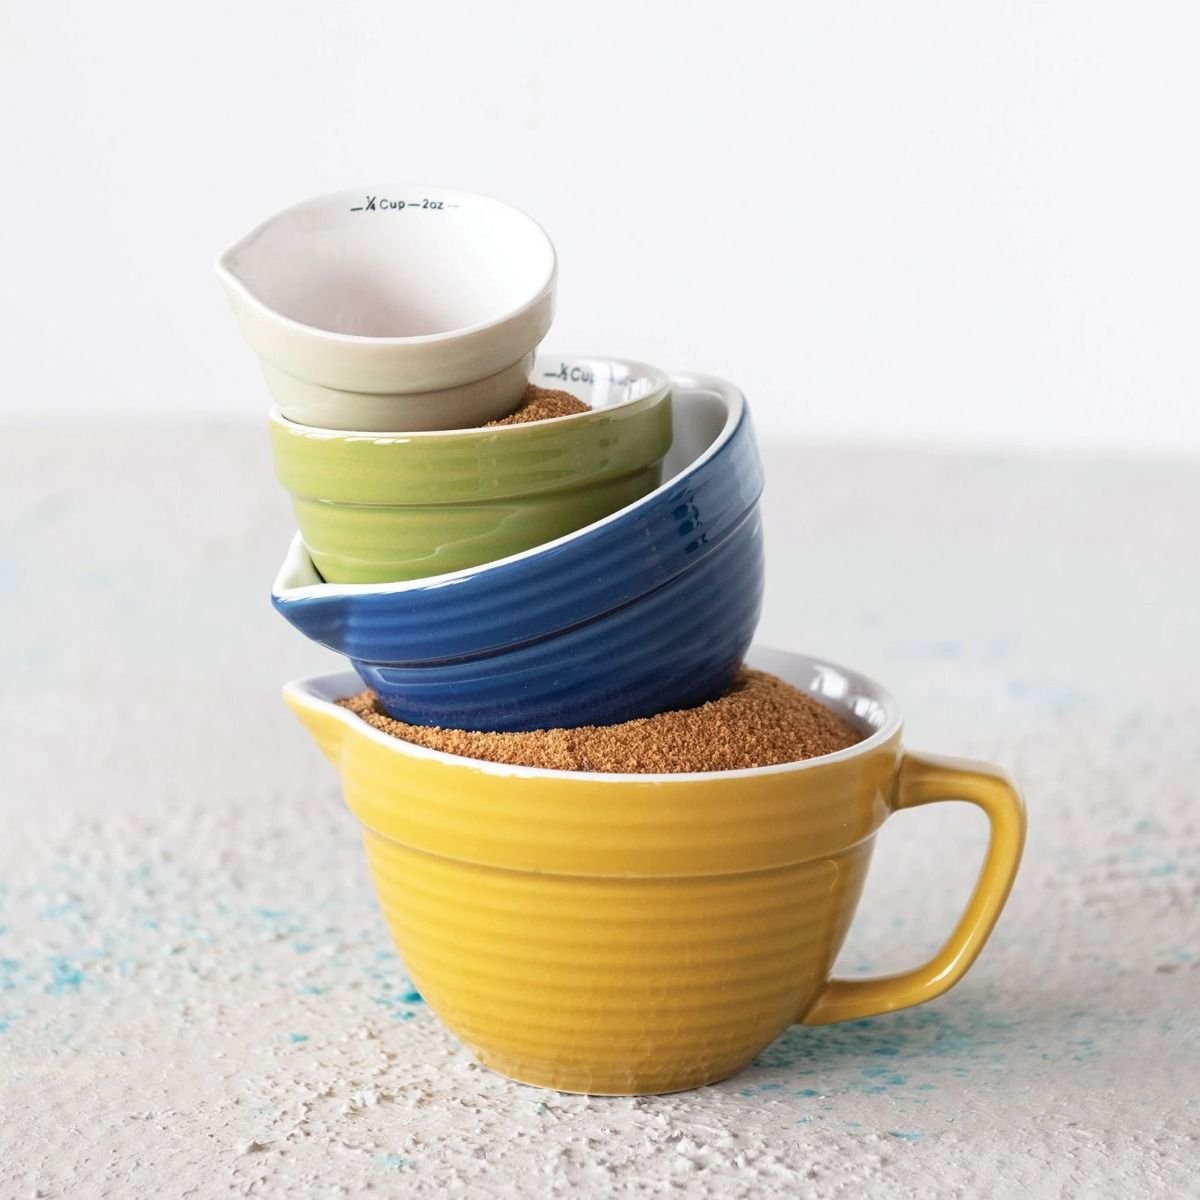 Stoneware Multi-Colored Measuring Cups (Set of 4), Creative Co-Op